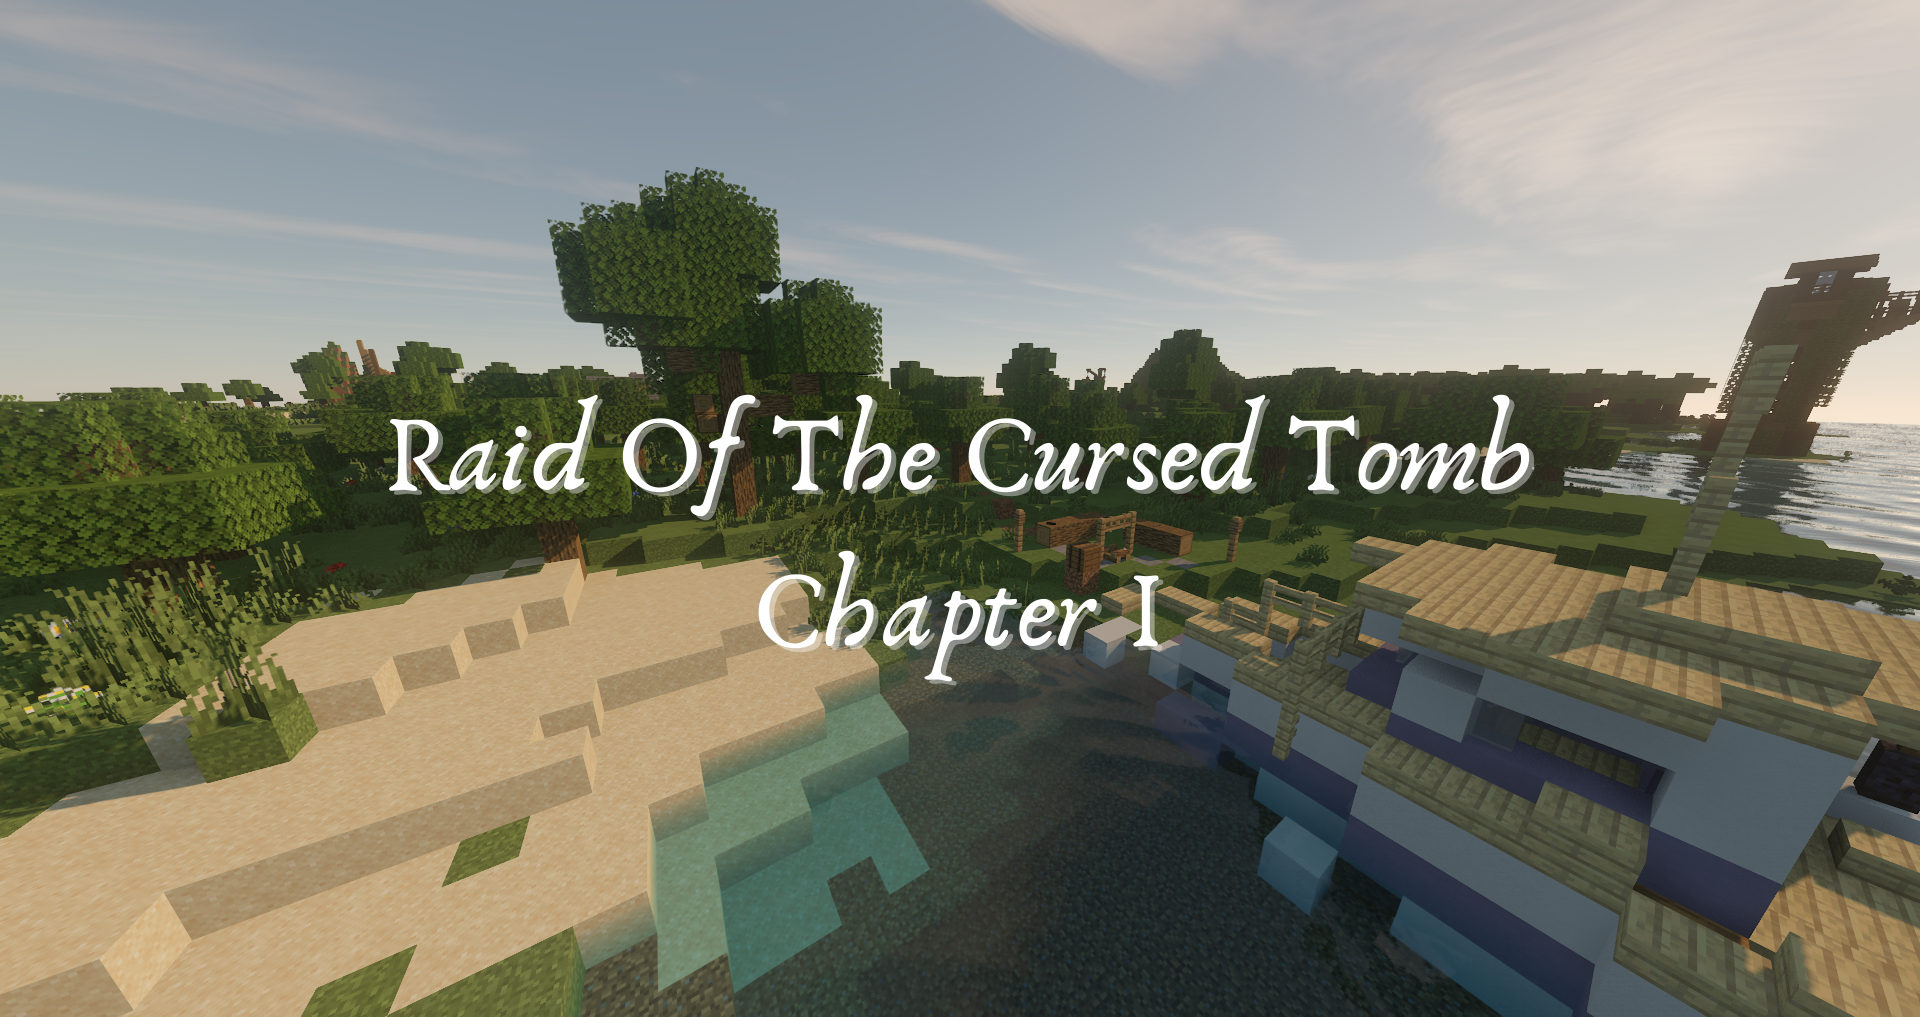 Télécharger Raid of the Cursed Tomb: Chapter I pour Minecraft 1.16.3